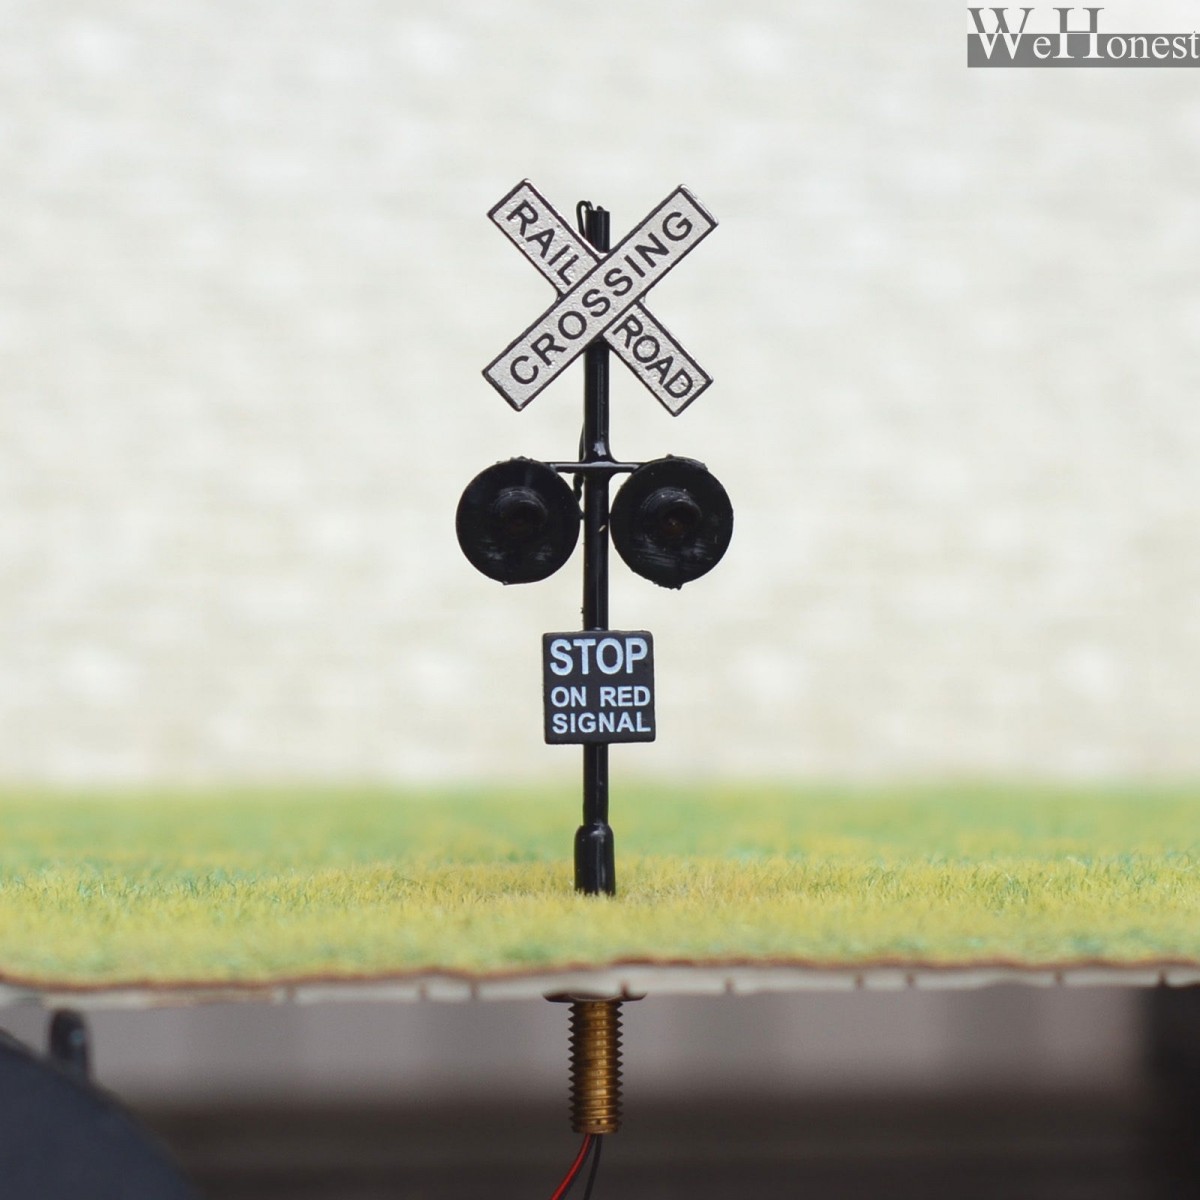    2 x HO Scale Railroad Crossing Signals 2mm LEDs made + 1 Circuit board flashers